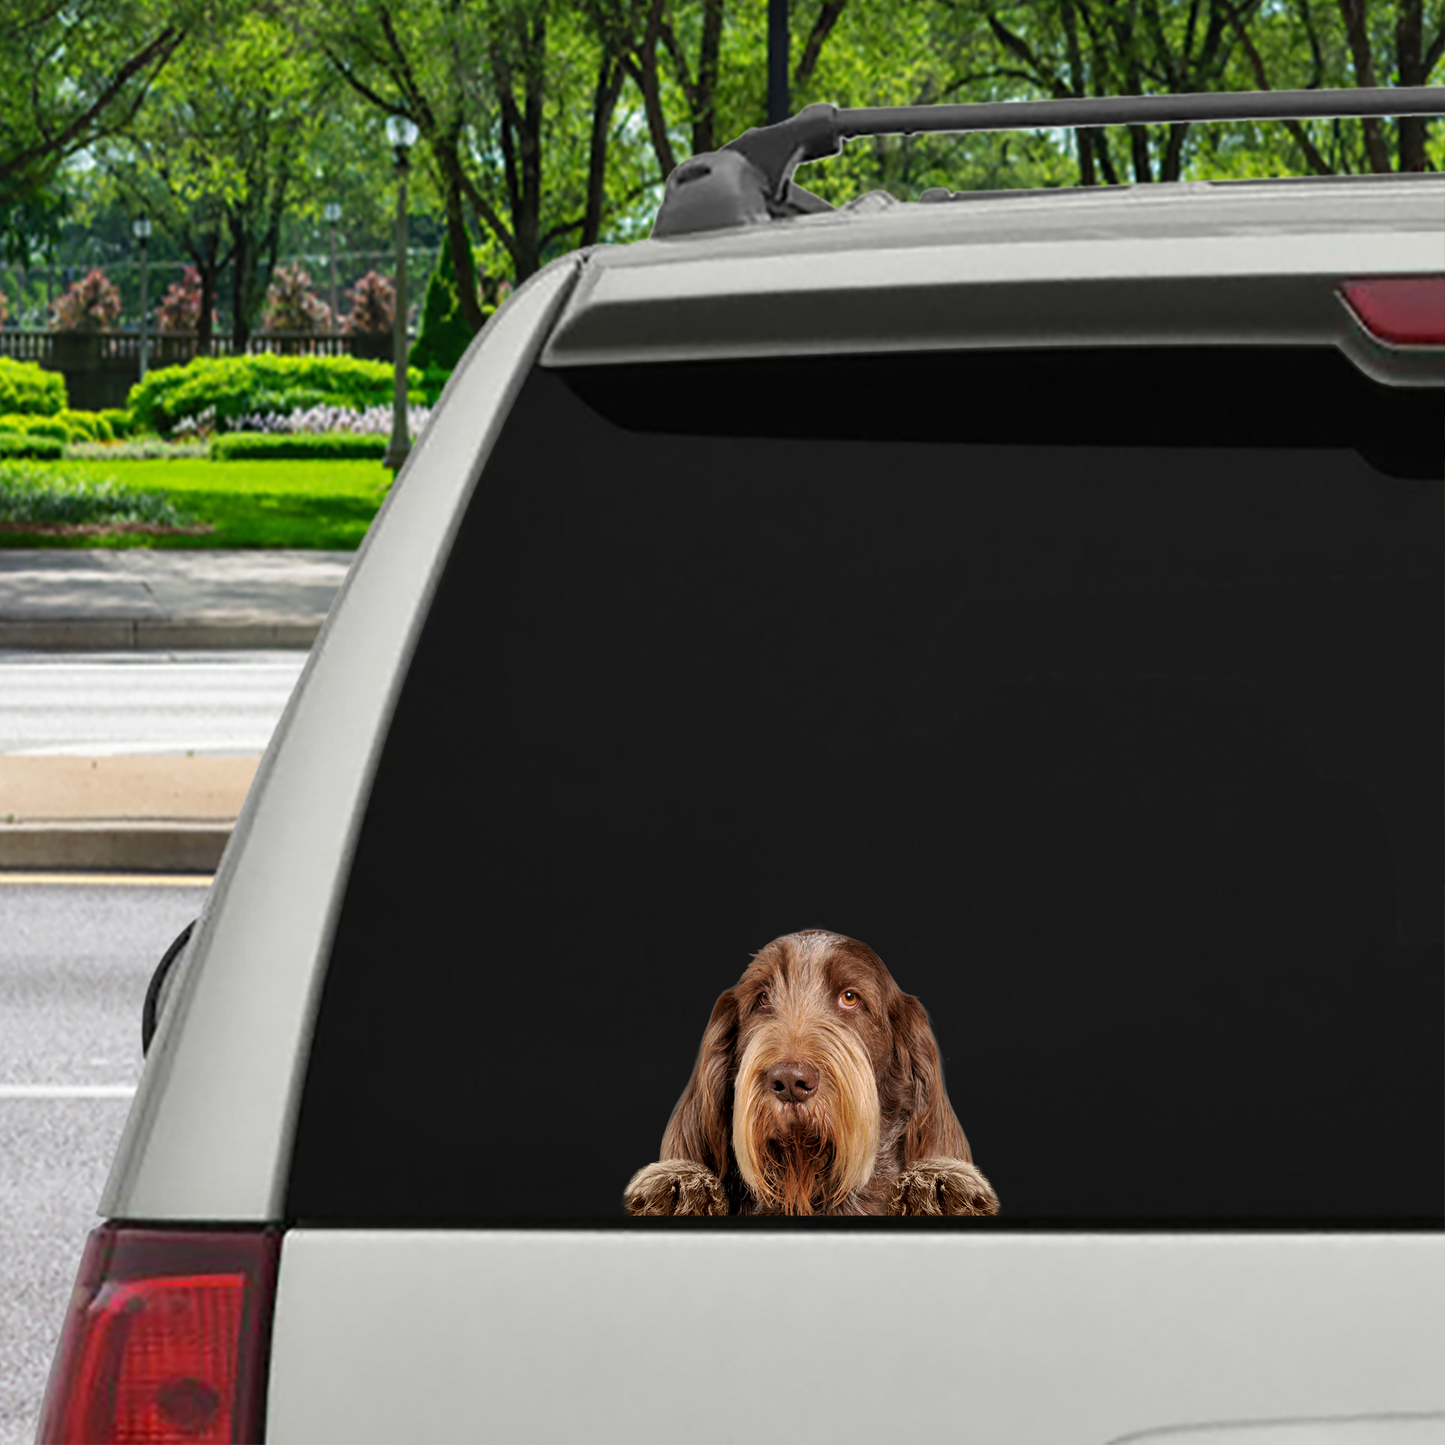 Can You See Me Now - Italian Spinone Car/ Door/ Fridge/ Laptop Sticker V1